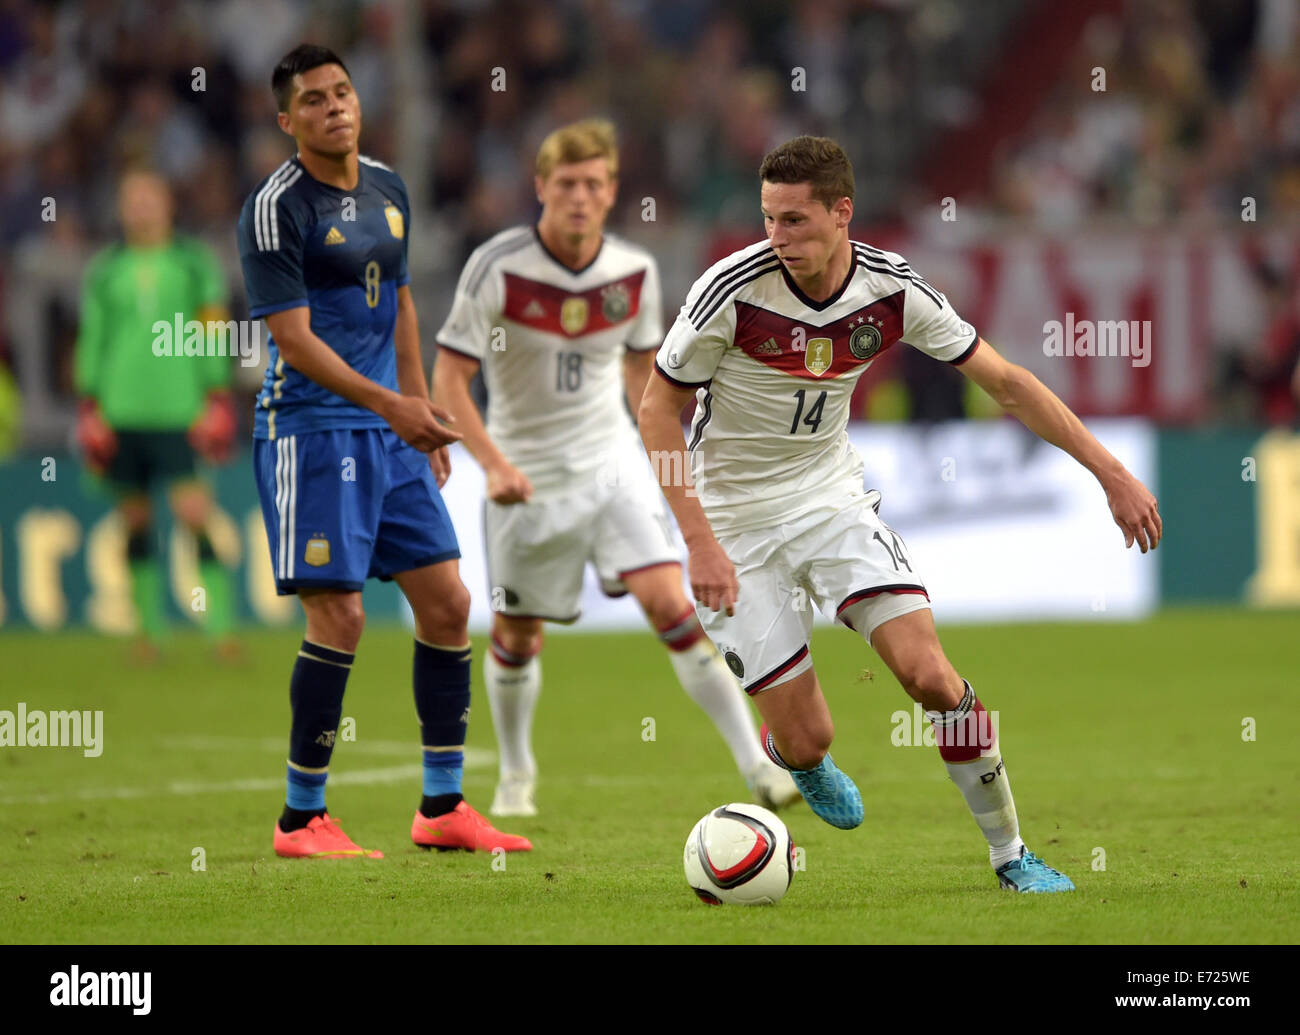 Duesseldorf, Germany. 03rd Sep, 2014. Germany's Julian Draxler (R) and Argentina's Enzo Perez (L) vie for the ball during the international soccer match between Germany and Argentina at Esprit arena in Duesseldorf, Germany, 03 September 2014. Photo: Federico Gambarini/dpa/Alamy Live News Stock Photo